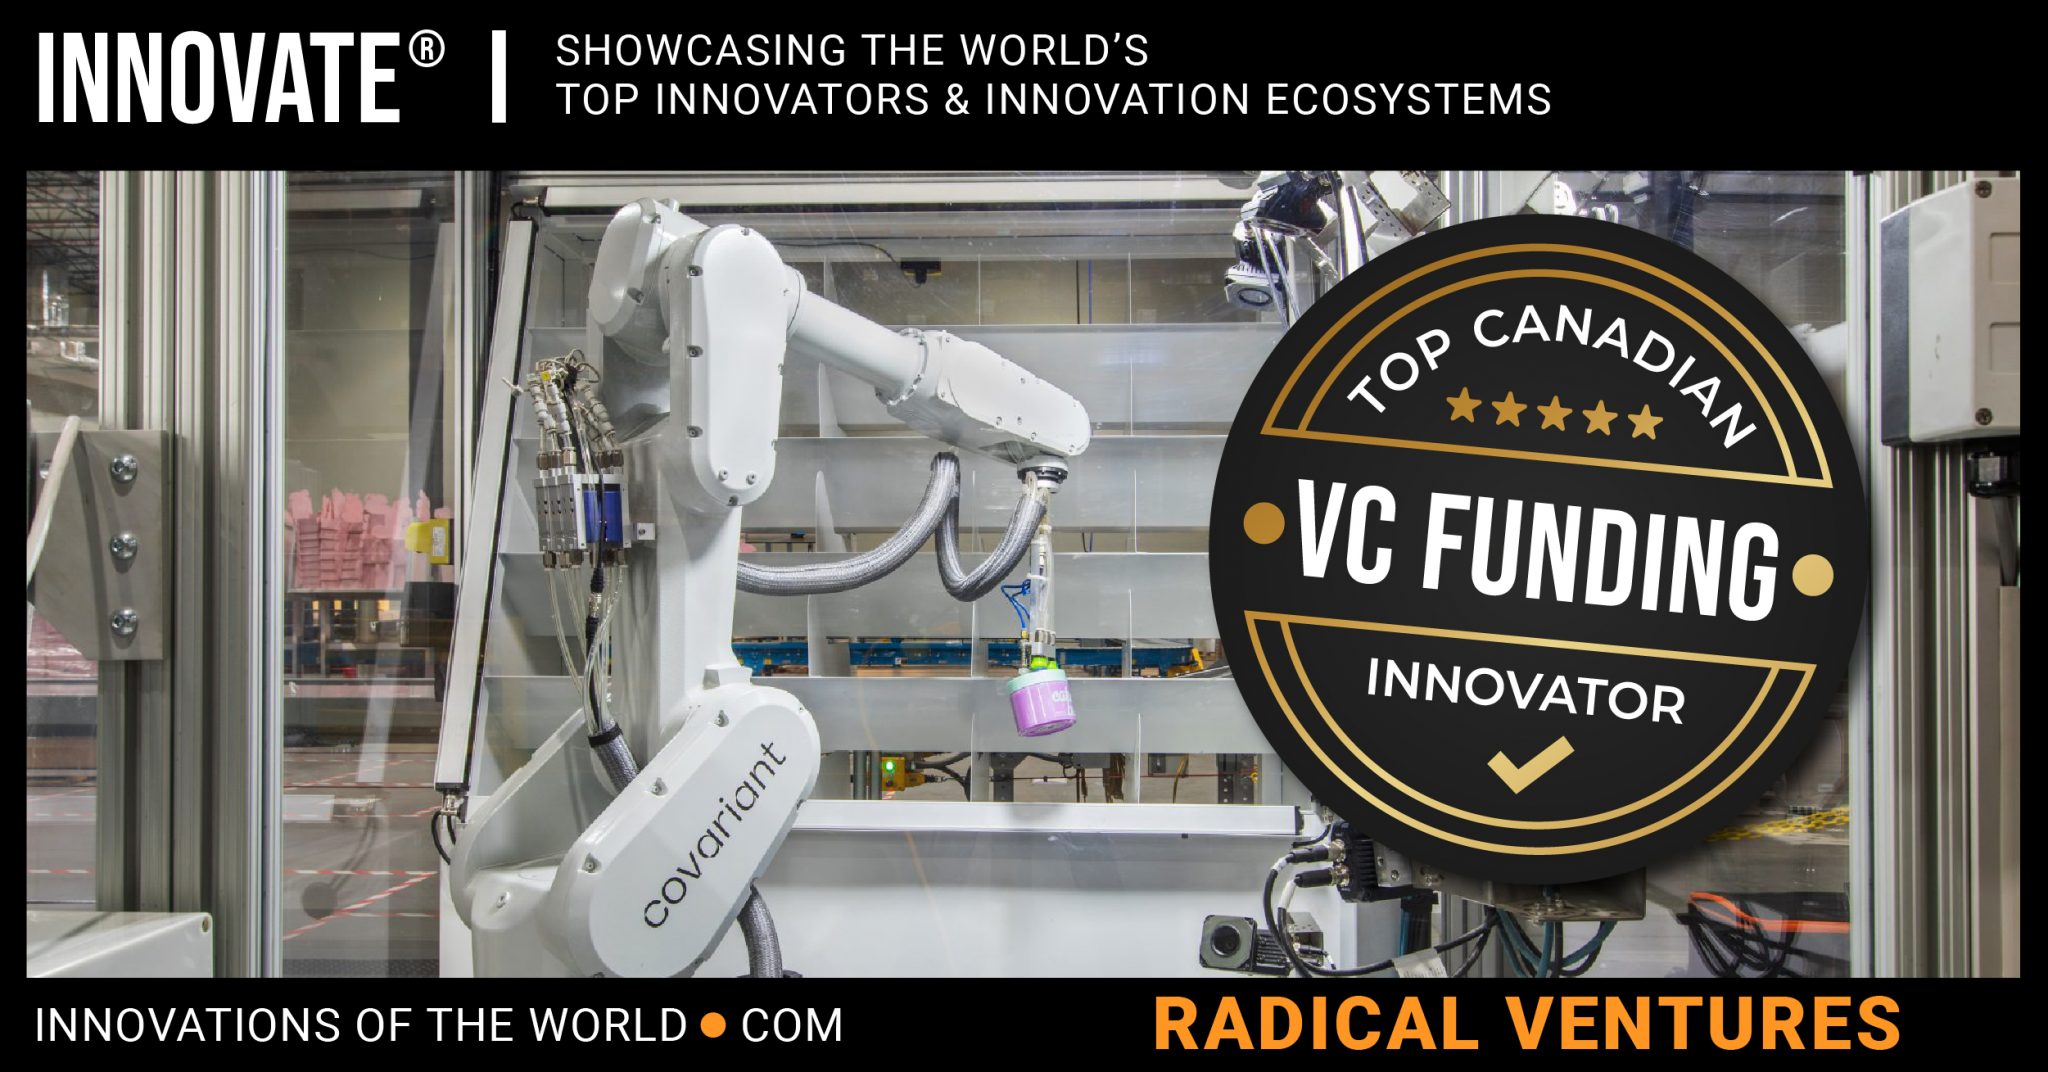 RADICAL VENTURES - AN AI-FOCUSED VENTURE CAPITAL FUND INVESTING IN PEOPLE WHO ARE SHAPING THE FUTURE OF HOW WE LIVE